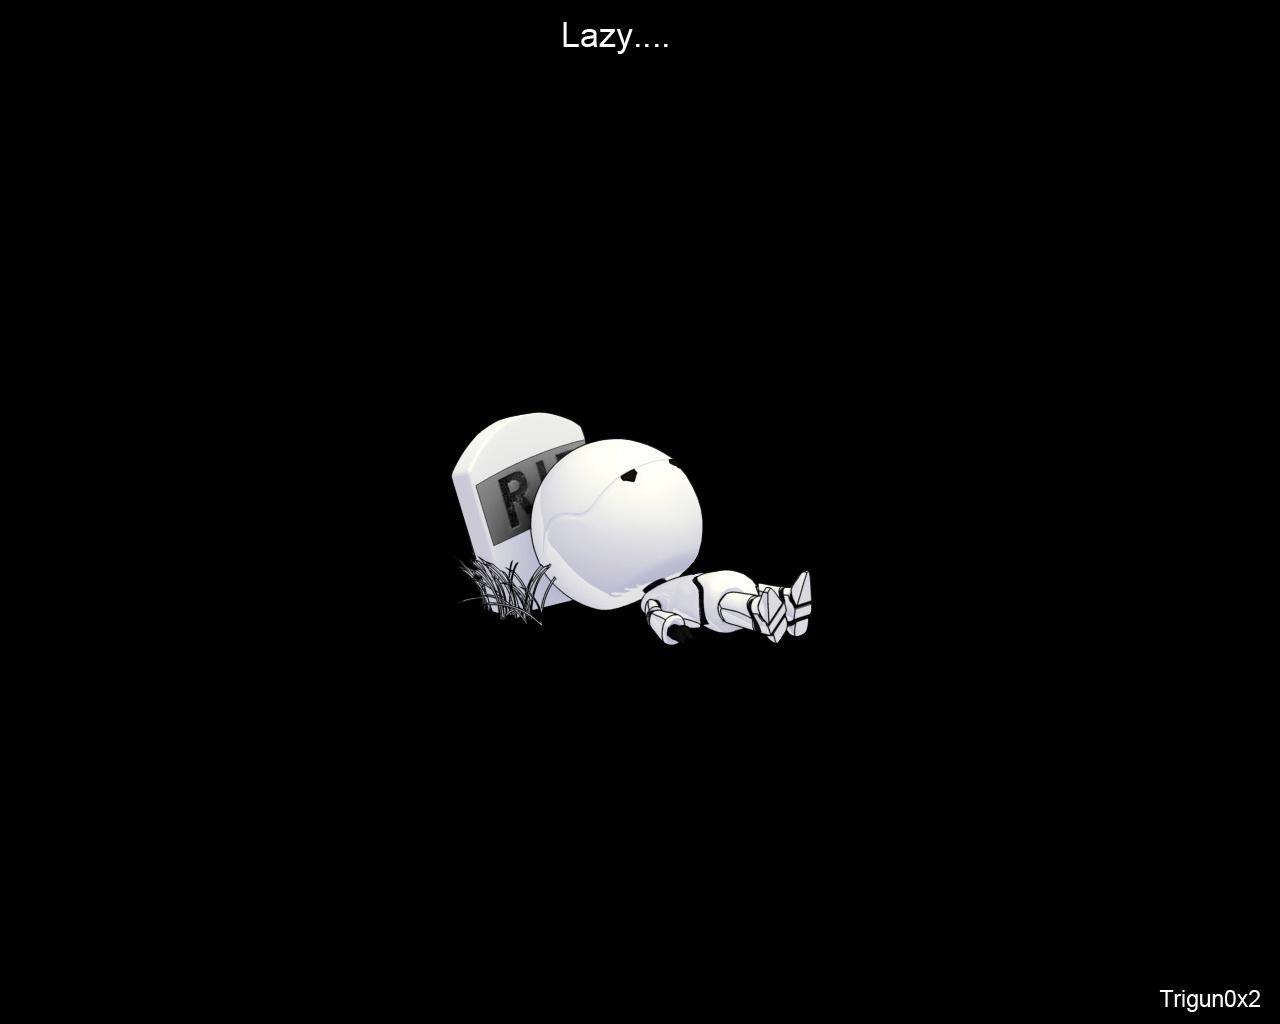 Lazy wallpaper by R4ND0MZ  Download on ZEDGE  cd47